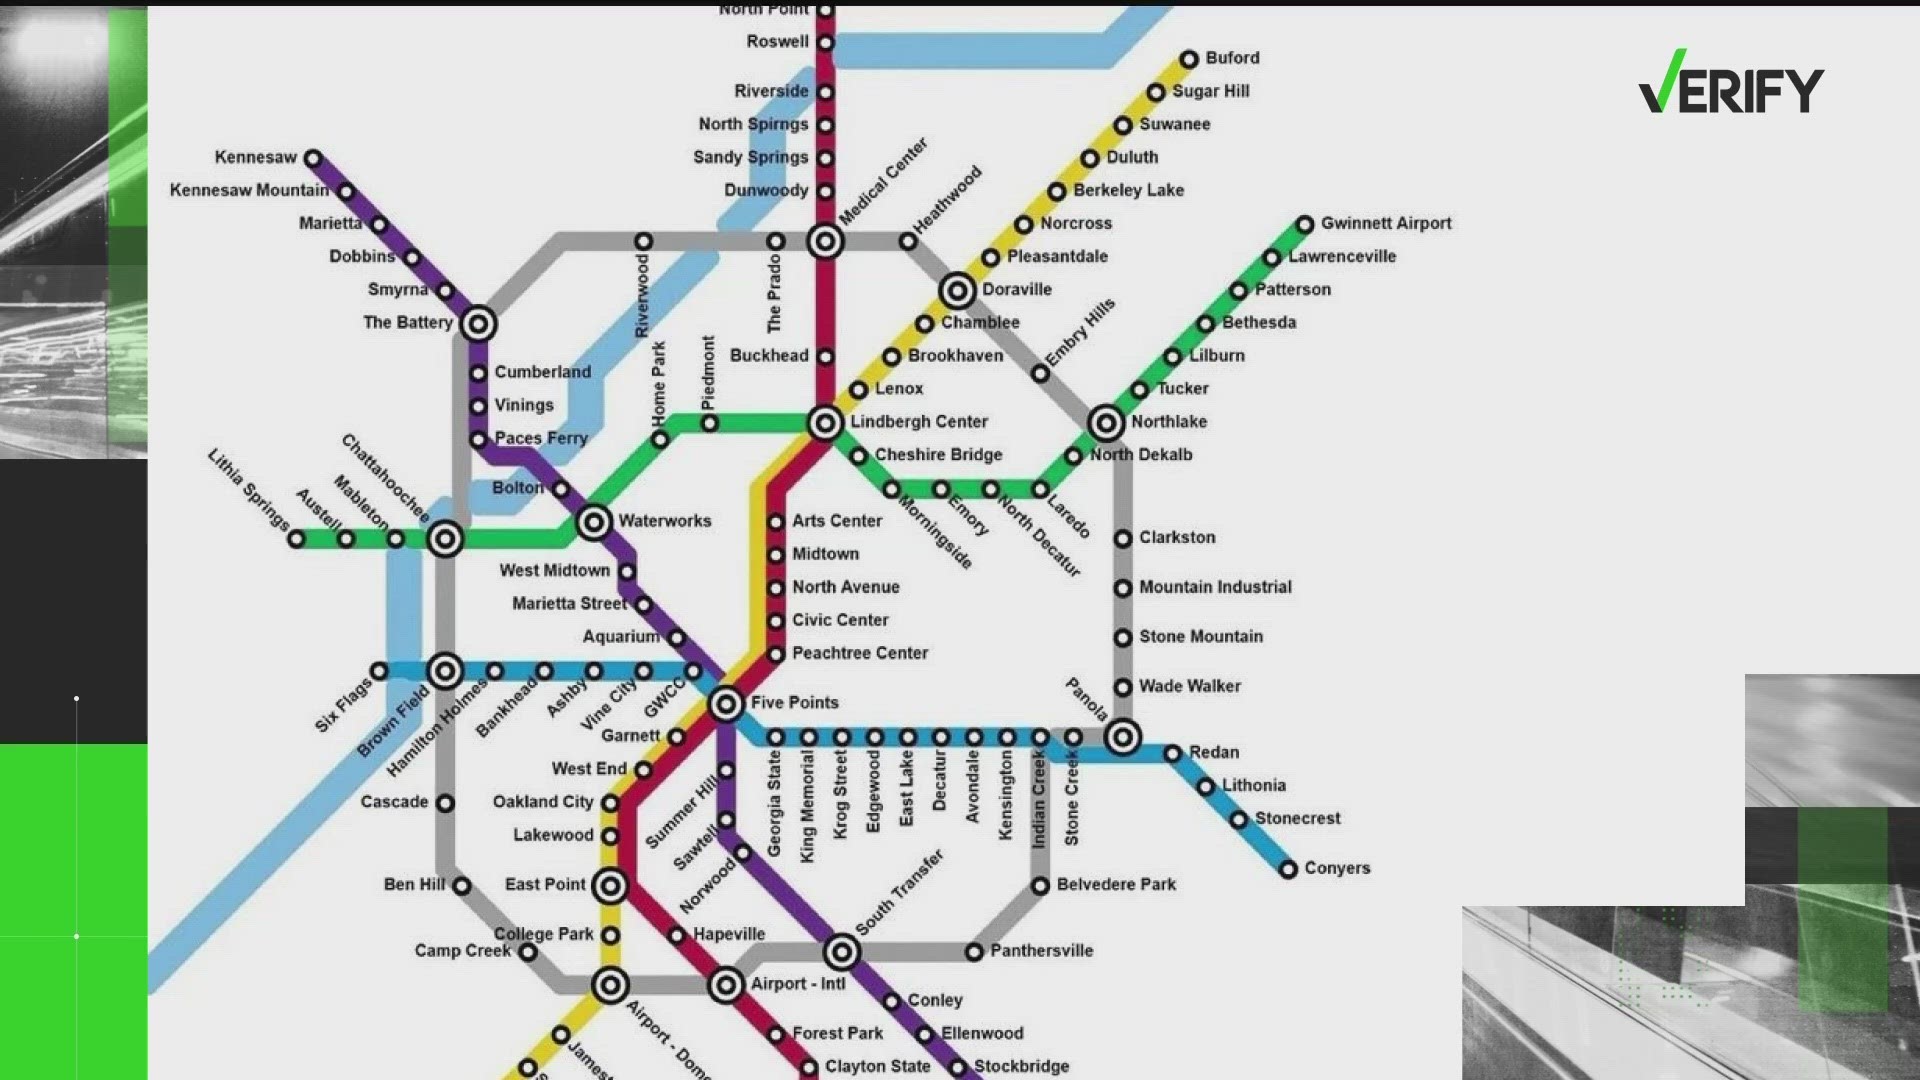 11Alive talked to the transit authority to see if the trending map was real.